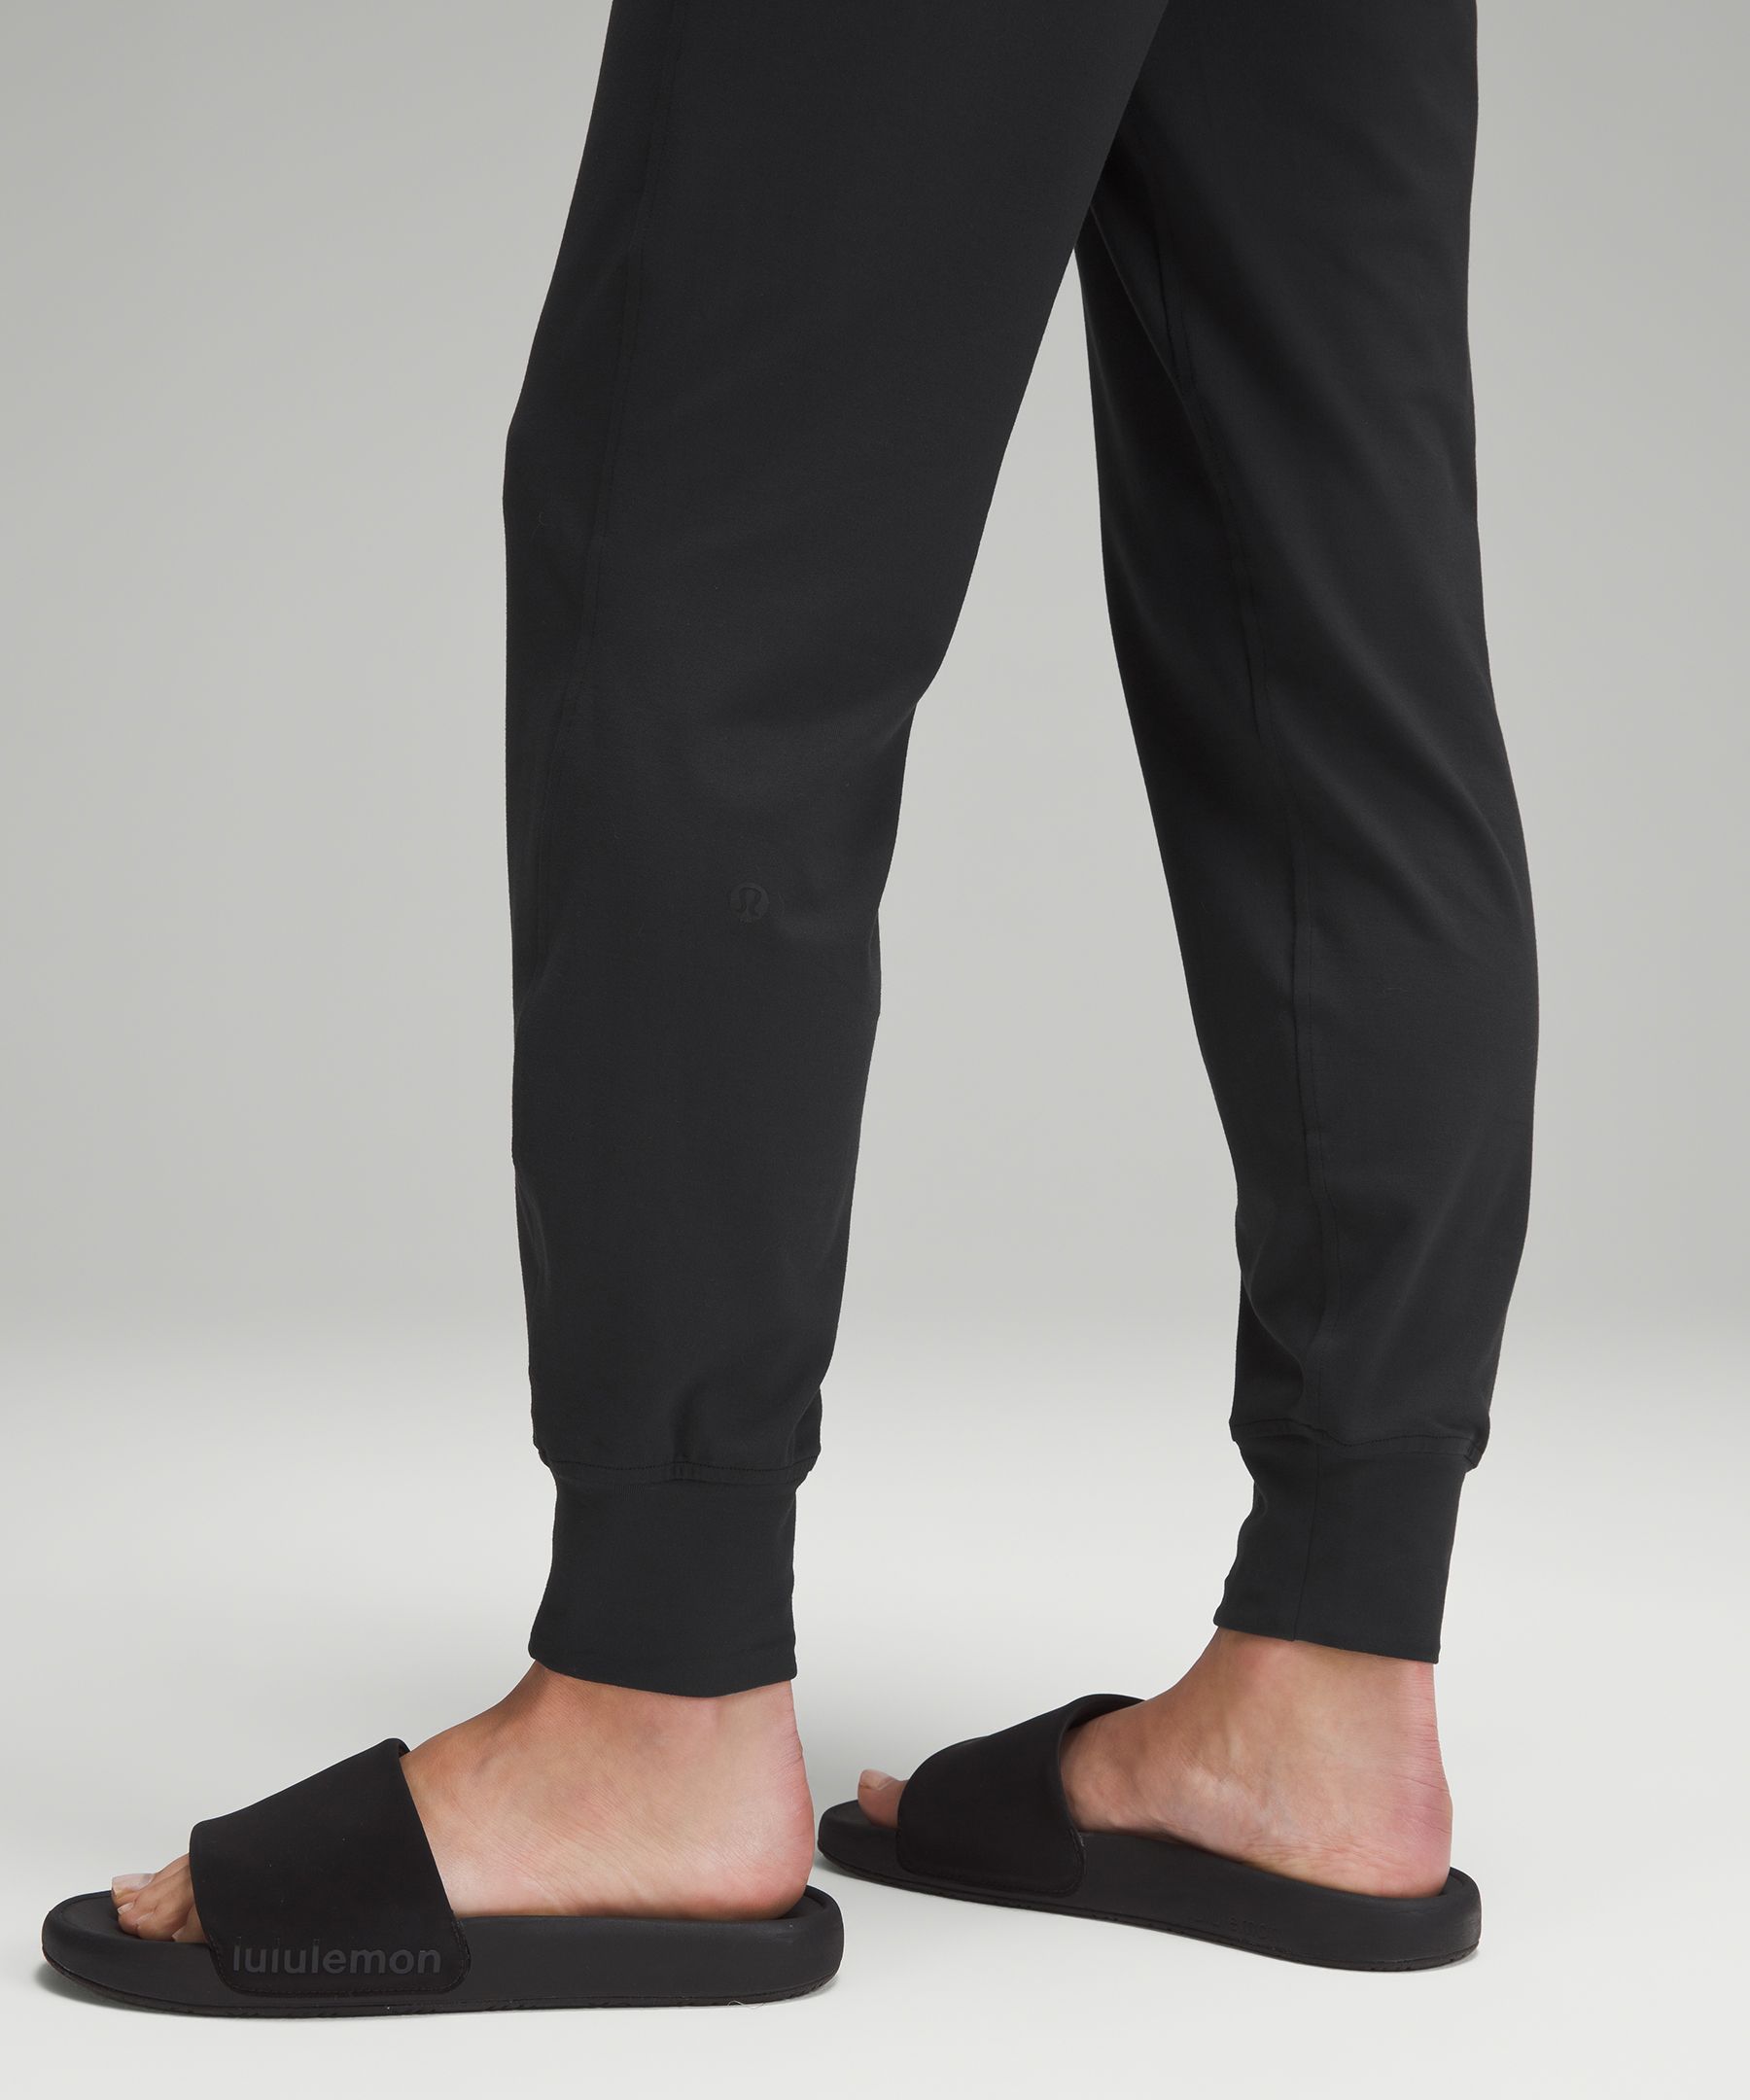 Lululemon Ready To Rulu jogger Tan Size 4 - $67 (36% Off Retail) - From  Lauren